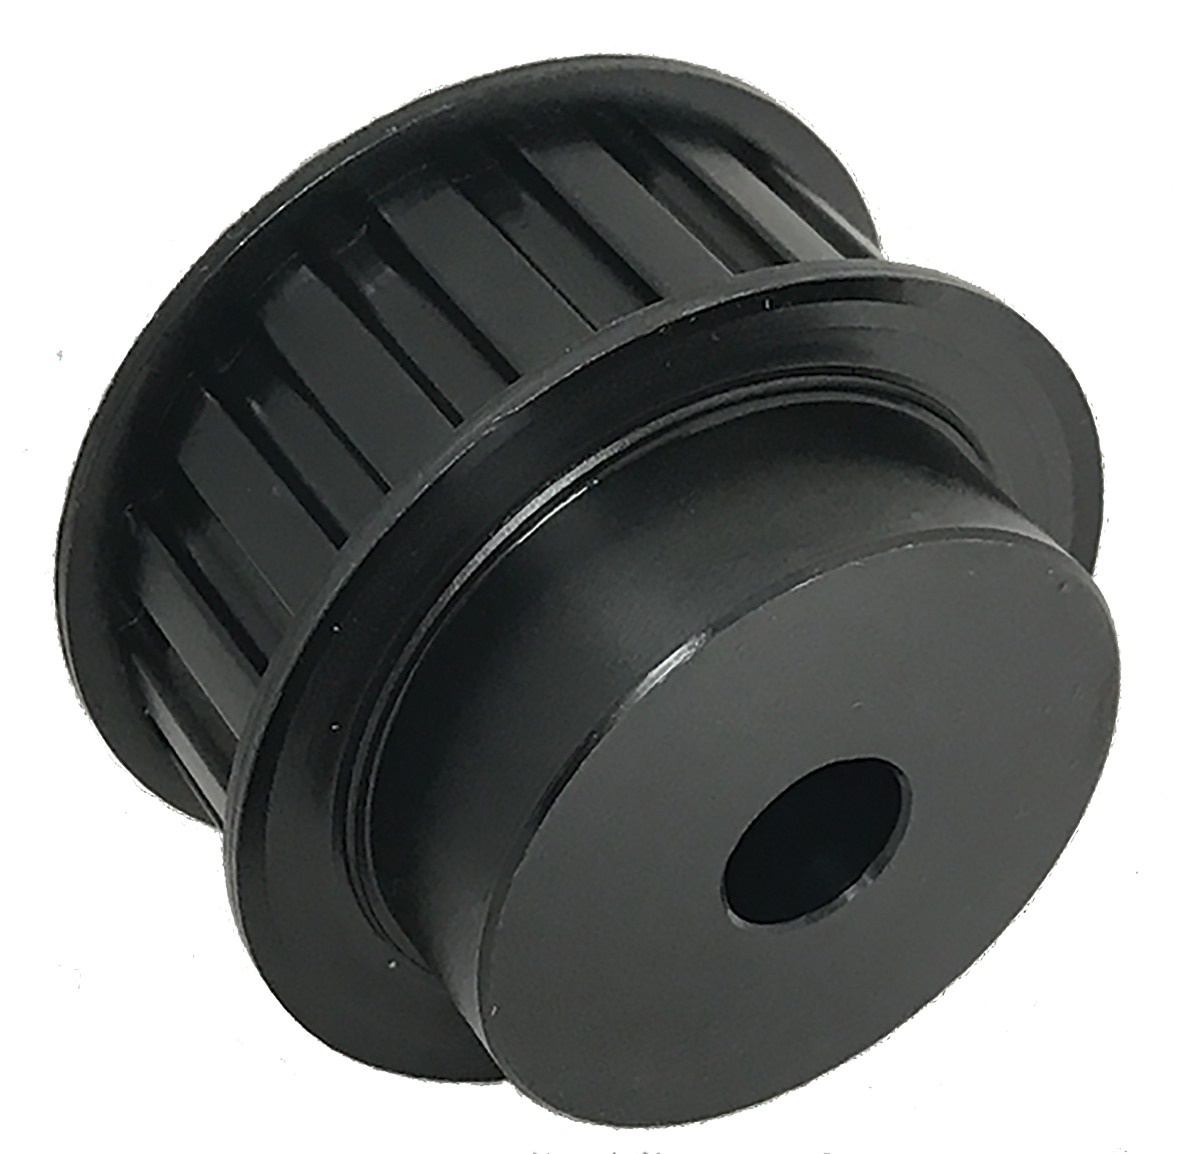 18H300-6FS8 - Steel Imperial Pitch Pulleys